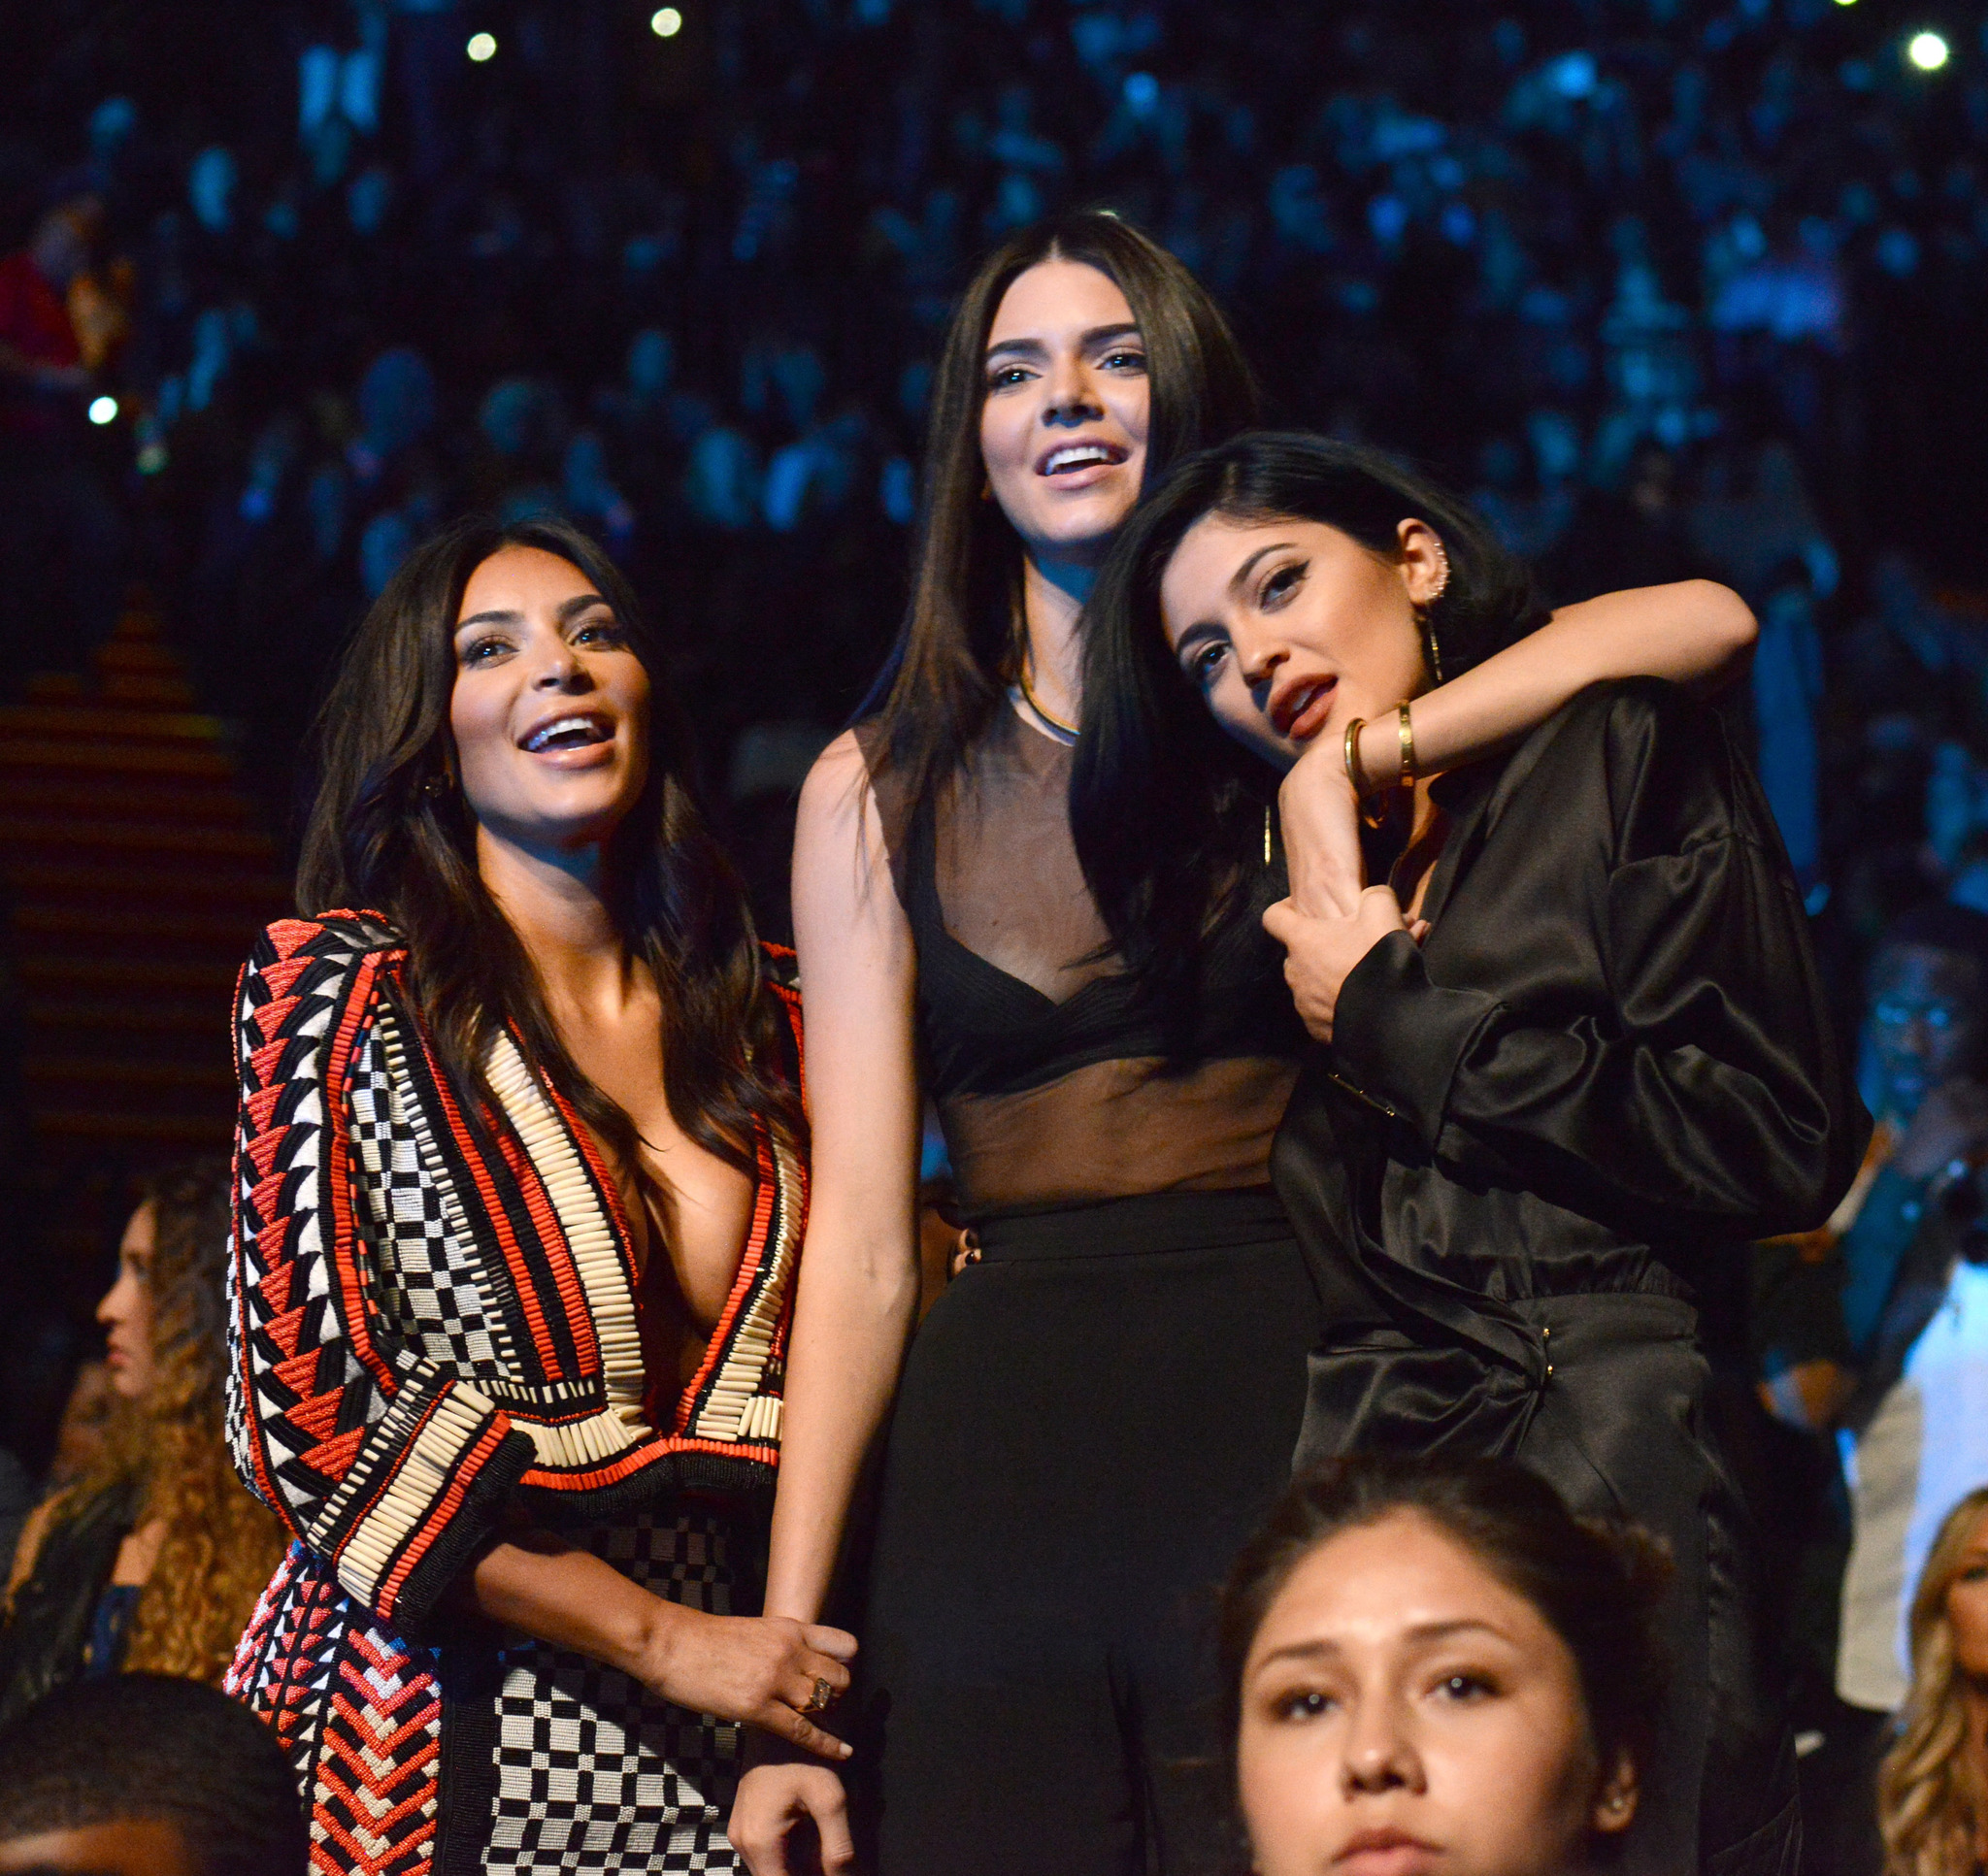 Kim Kardashian West, Kylie Jenner and Kendall Jenner at event of 2014 MTV Video Music Awards (2014)